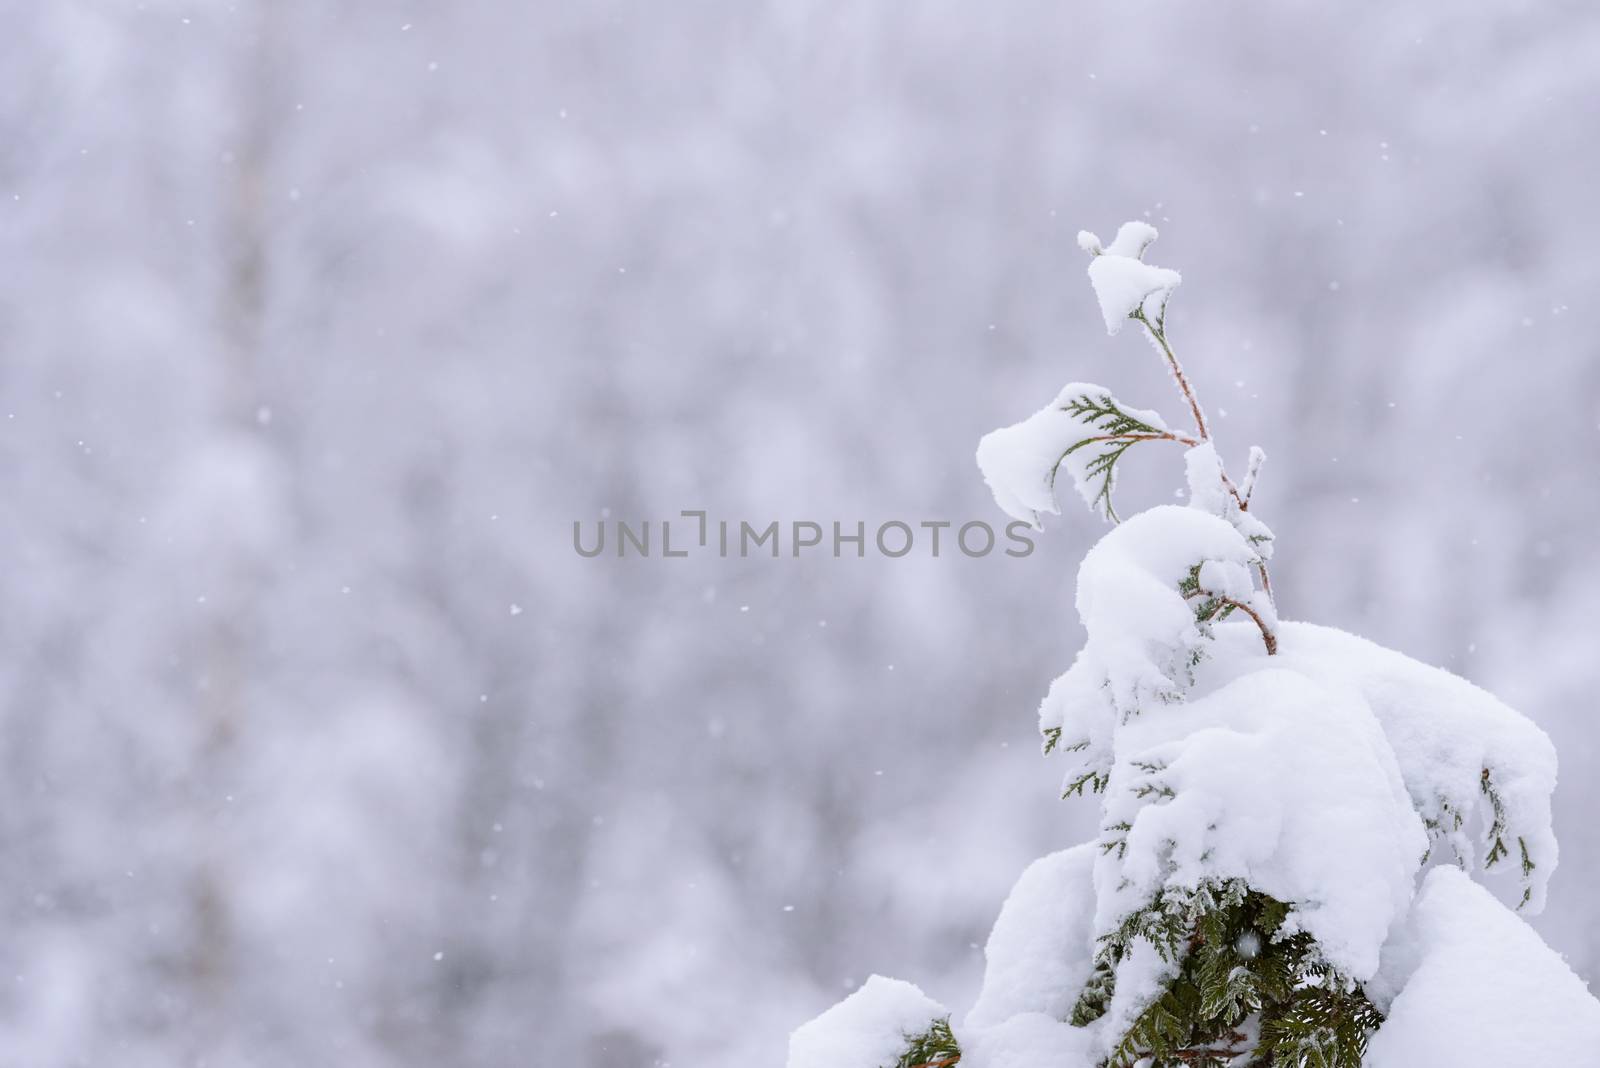 The branch of tree has covered with heavy snow in winter season  by animagesdesign